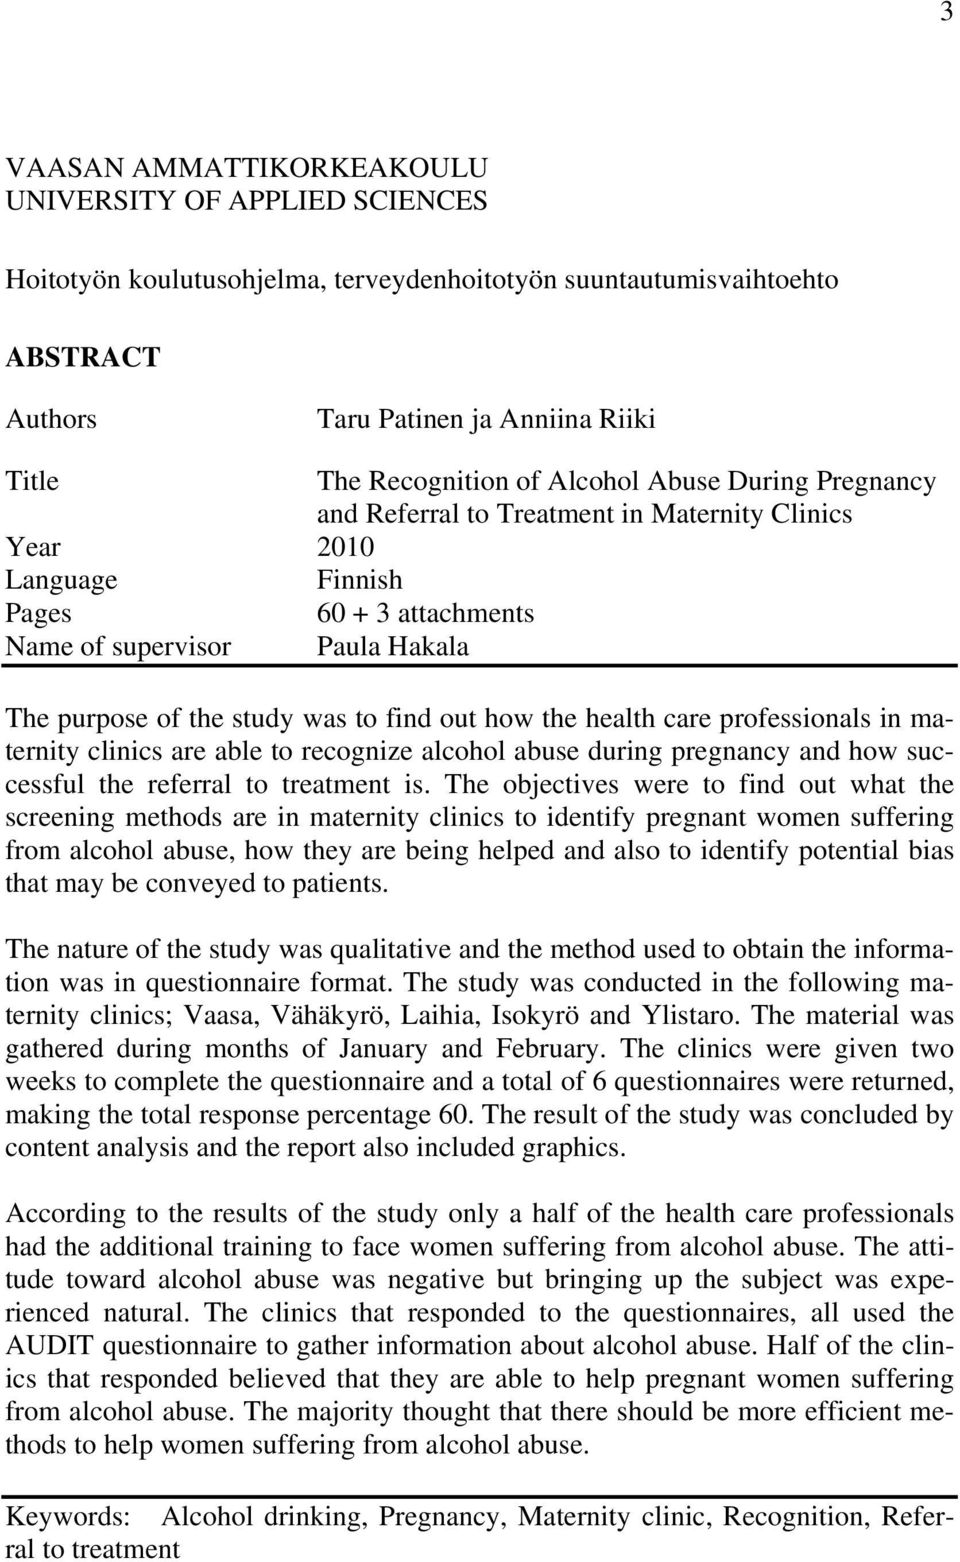 out how the health care professionals in maternity clinics are able to recognize alcohol abuse during pregnancy and how successful the referral to treatment is.